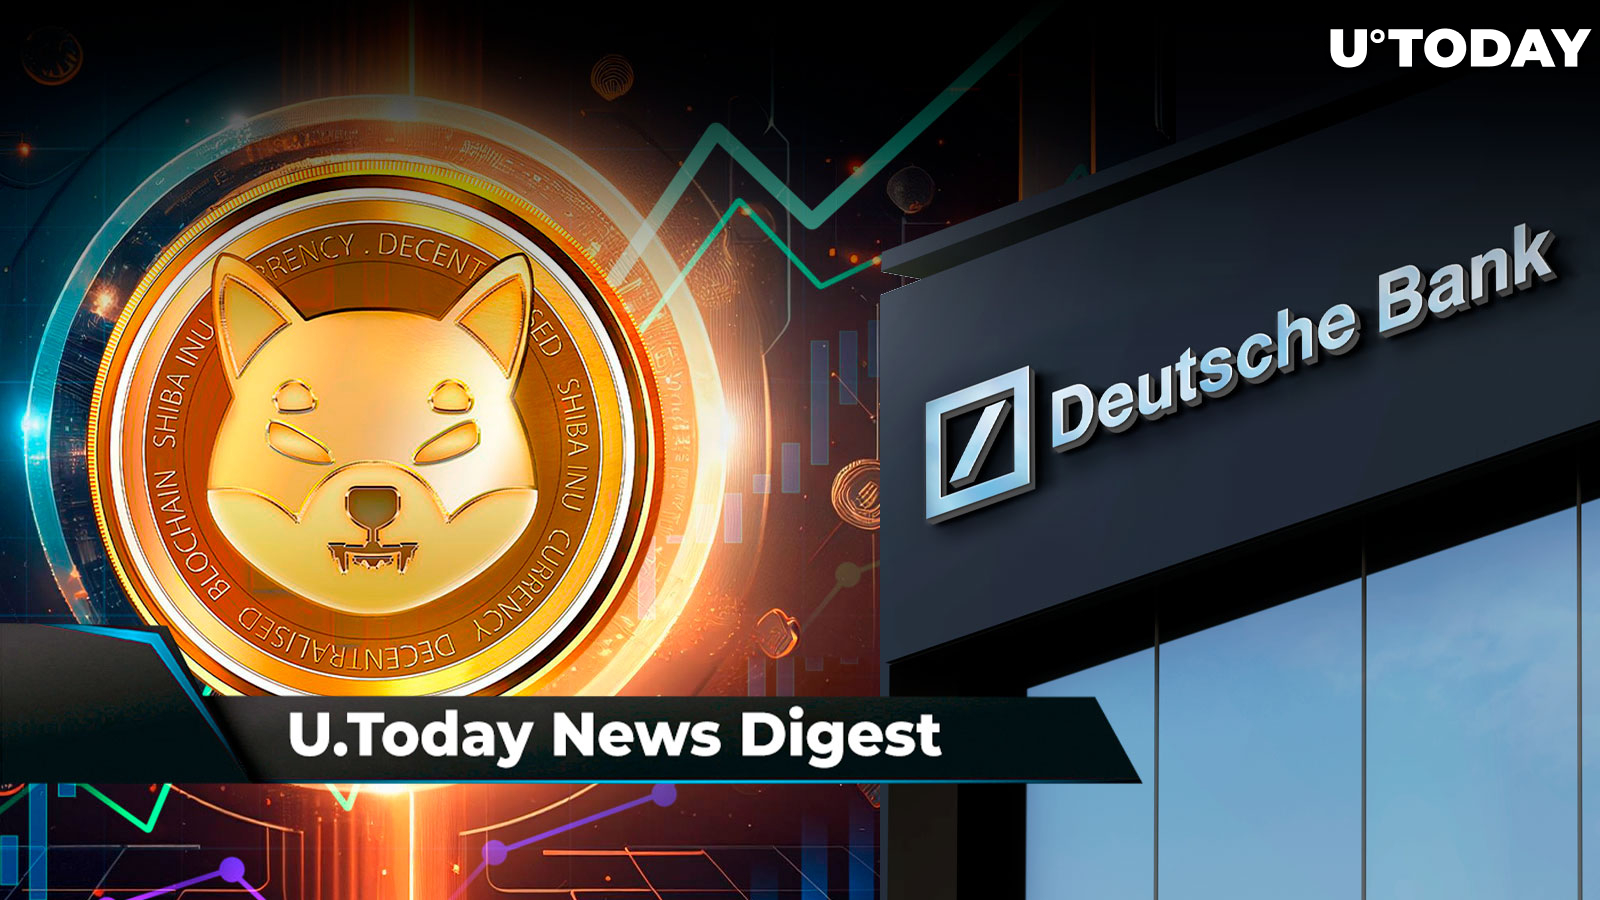 Deutsche Bank Makes Major U-Turn on Crypto, Shibarium Daily Transactions Jump to 200,000, Ripple and Tranglo Set Sights on Three Asian Countries: Crypto News Digest by U.Today